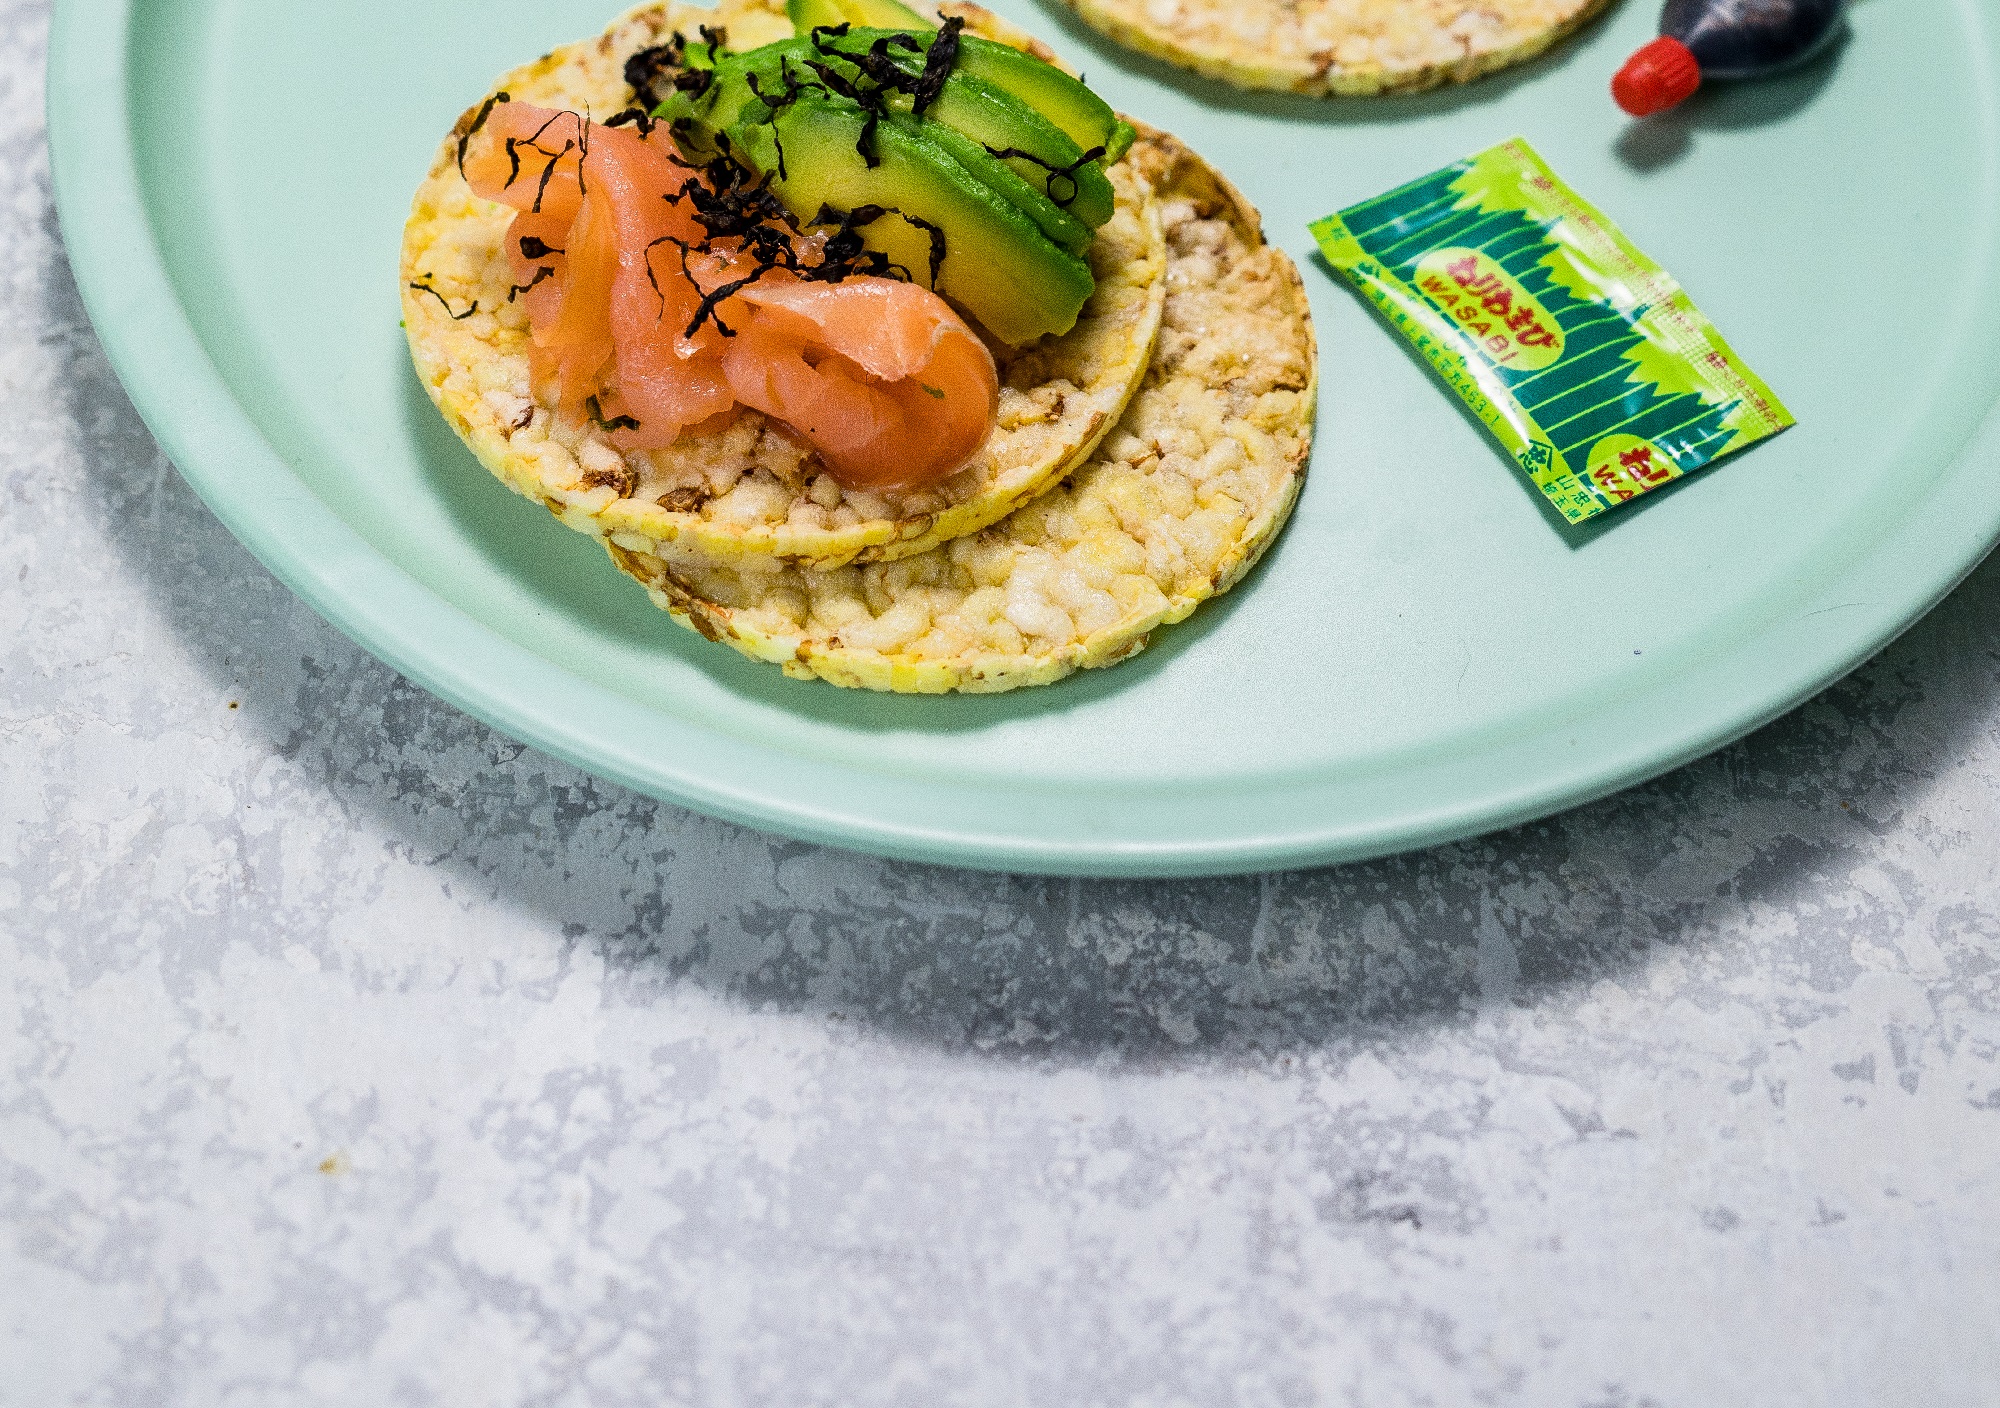 Salmon, Nori Flakes & Avocado on CORN THINS slices for lunch